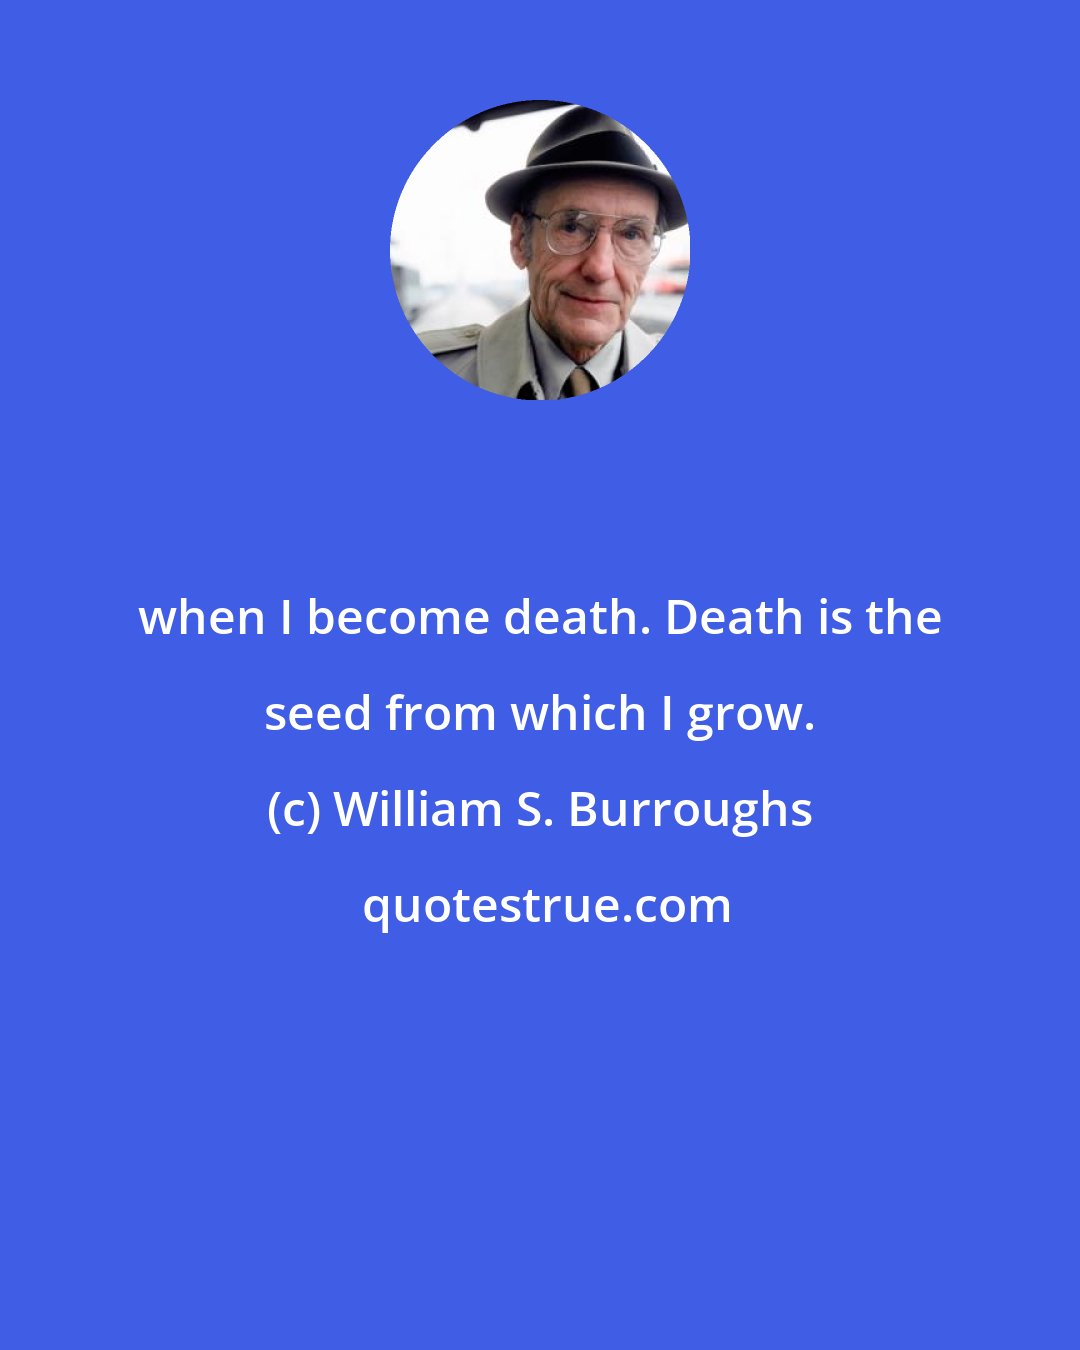 William S. Burroughs: when I become death. Death is the seed from which I grow.